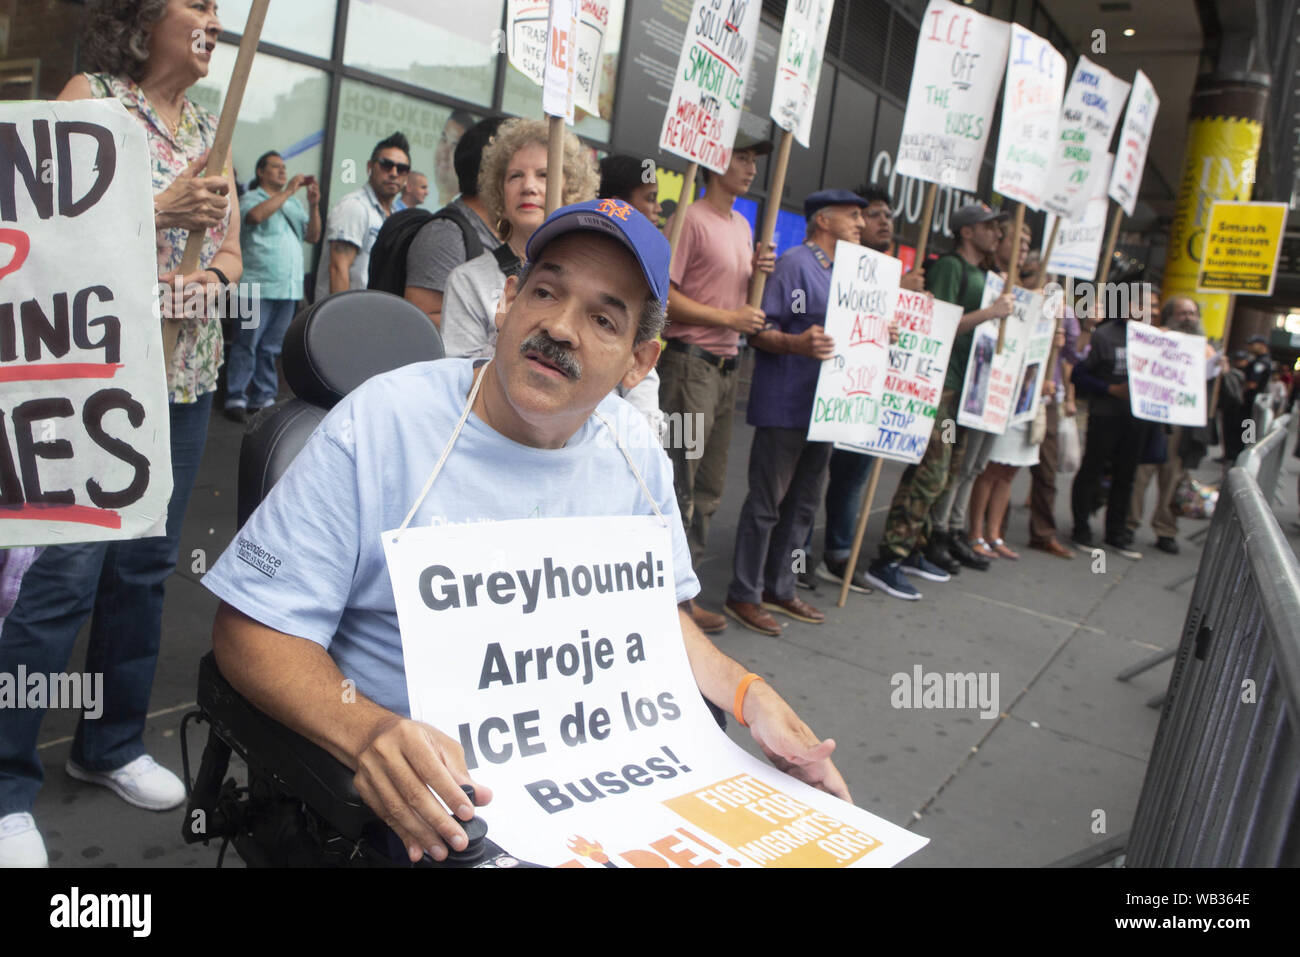 August 23, 2019: ROBERT AVECEDO, of New York, appears during a protest against Greyhound Corporation and ICE (Immigration Customs and Enforcement) at the Port Authority Bus Terminal on 42nd and 8th Avenue in New York, New York. About 100 activists from a coalition of groups including FIRE (Fight For Immigrant Refugees Everywhere) protested Greyhound allowing ICE agents to board their busses 'searching for migrants,'' officials said. 'As a disabled person I wanted to support this.'' Avecedo said. Credit: Brian Branch Price/ZUMA Wire/Alamy Live News Stock Photo